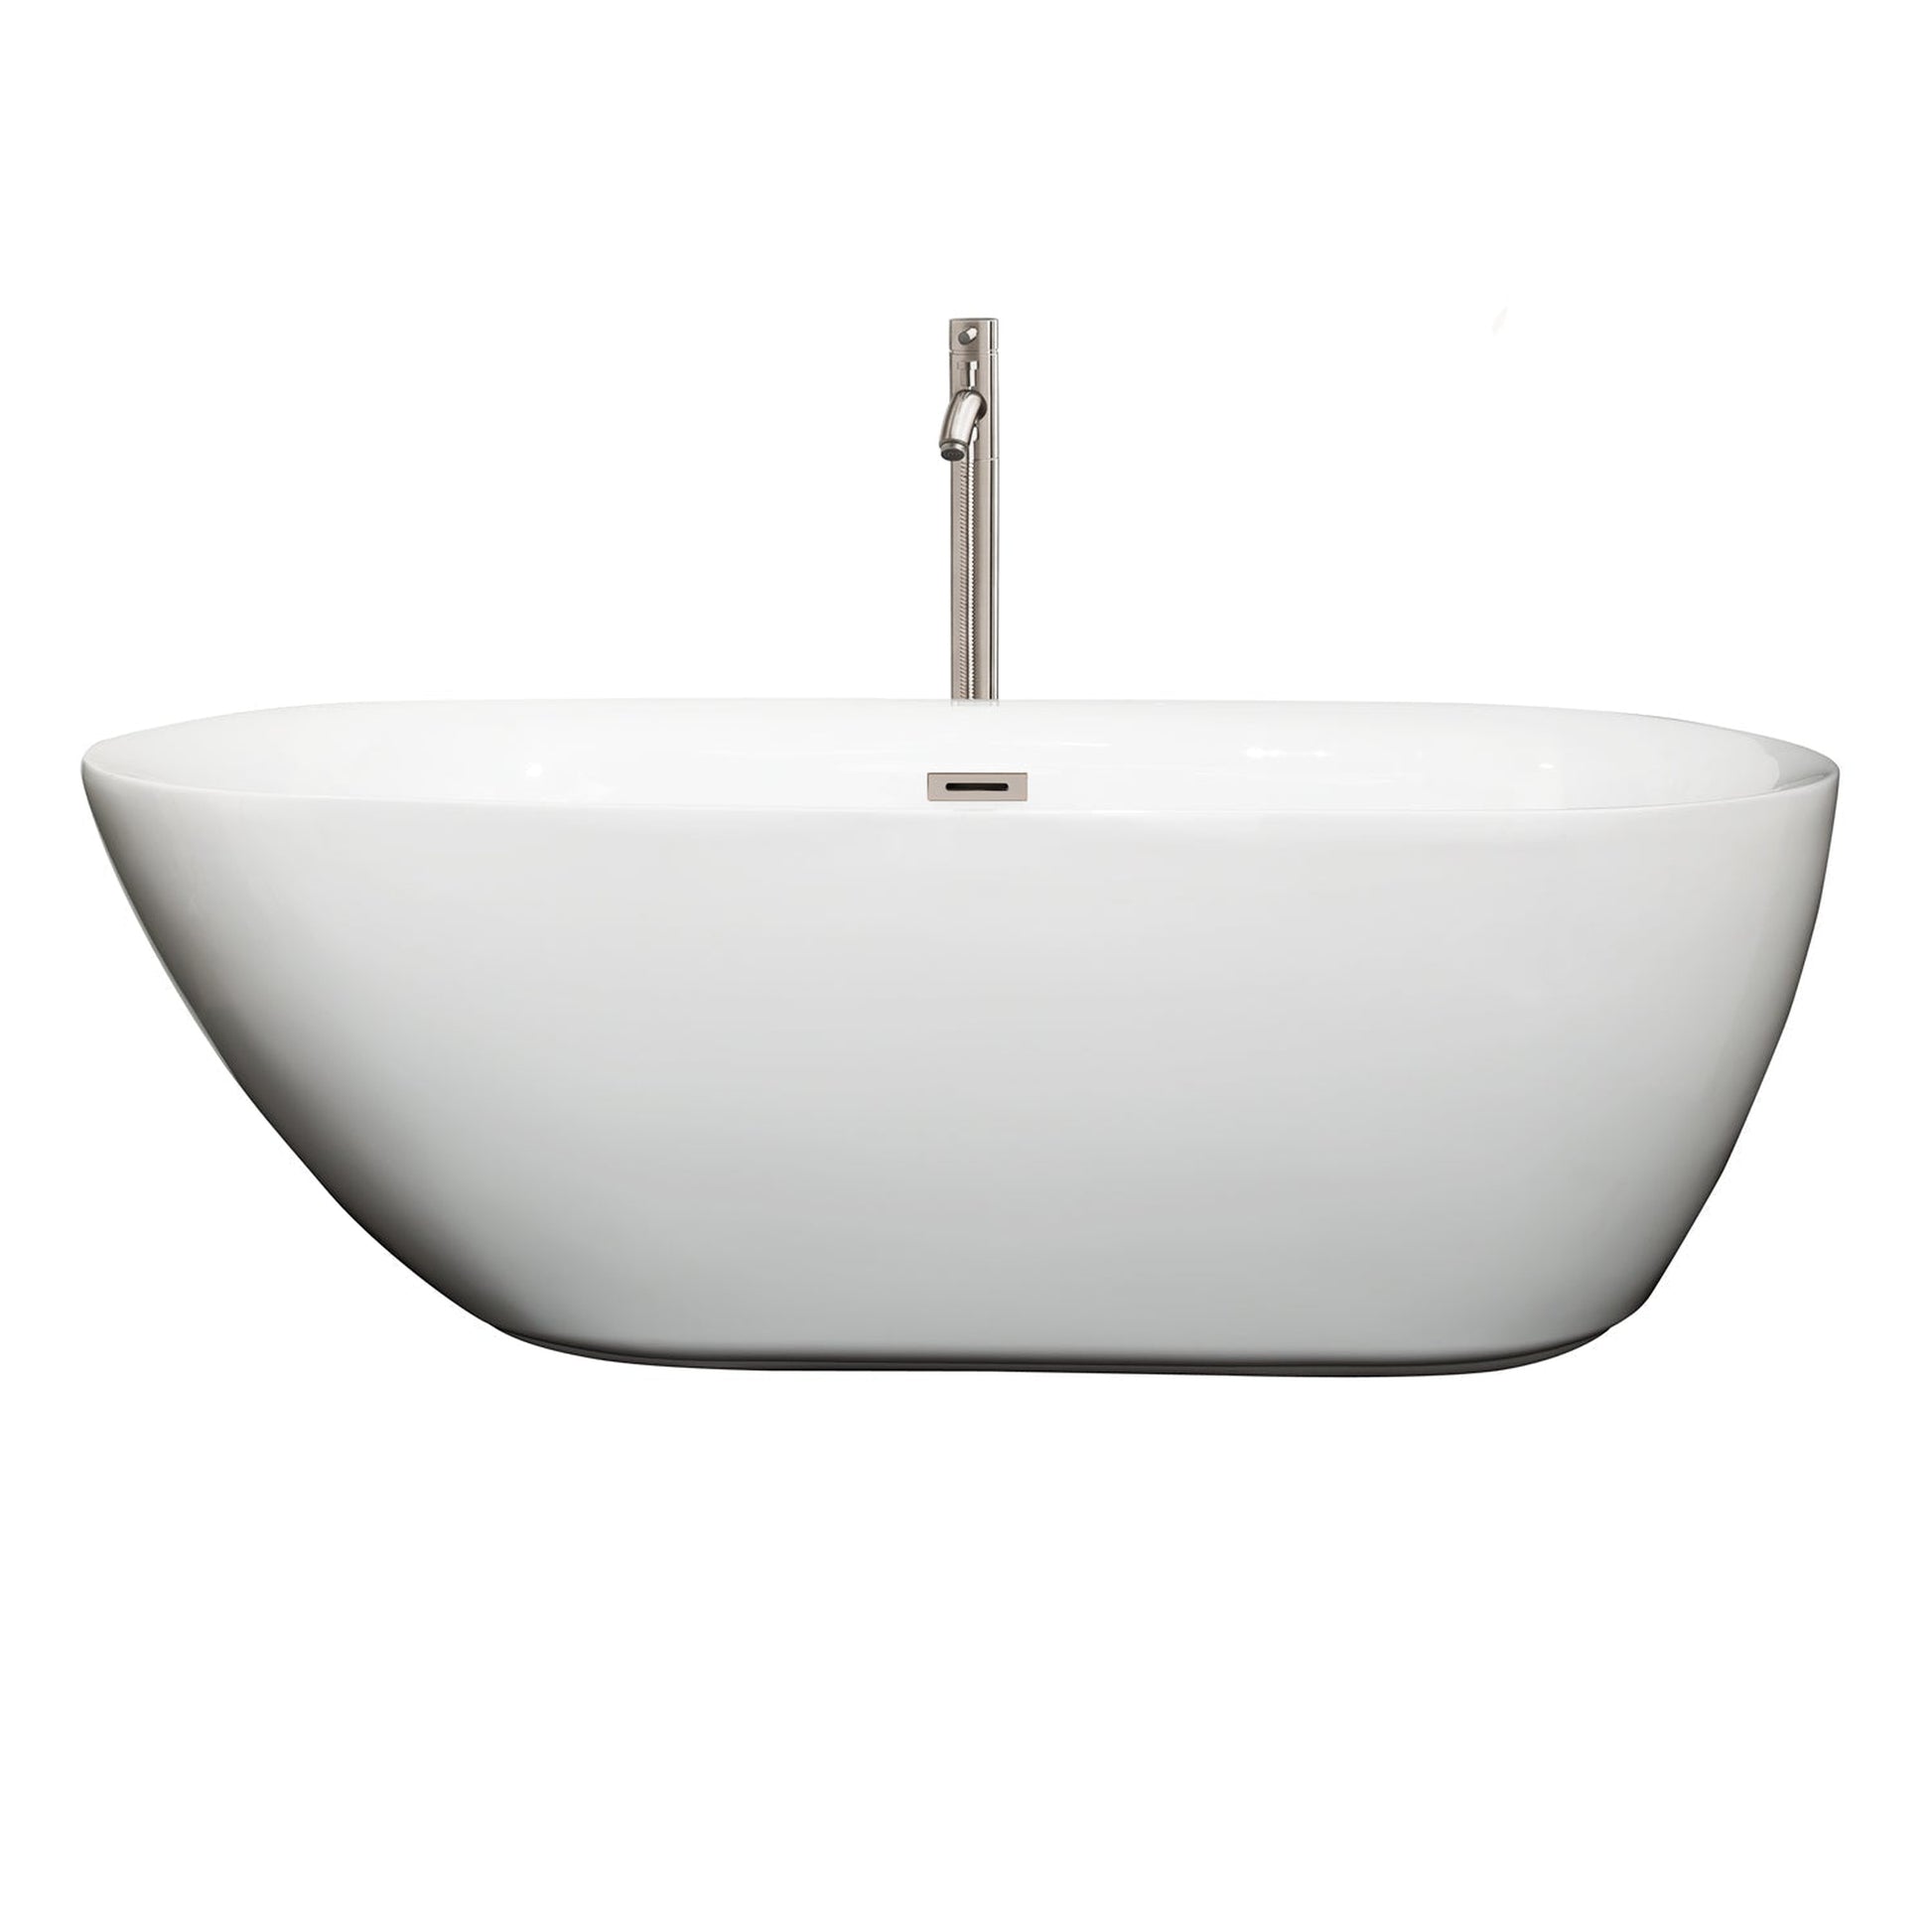 Wyndham Collection Melissa 65" Freestanding Bathtub in White With Floor Mounted Faucet, Drain and Overflow Trim in Brushed Nickel